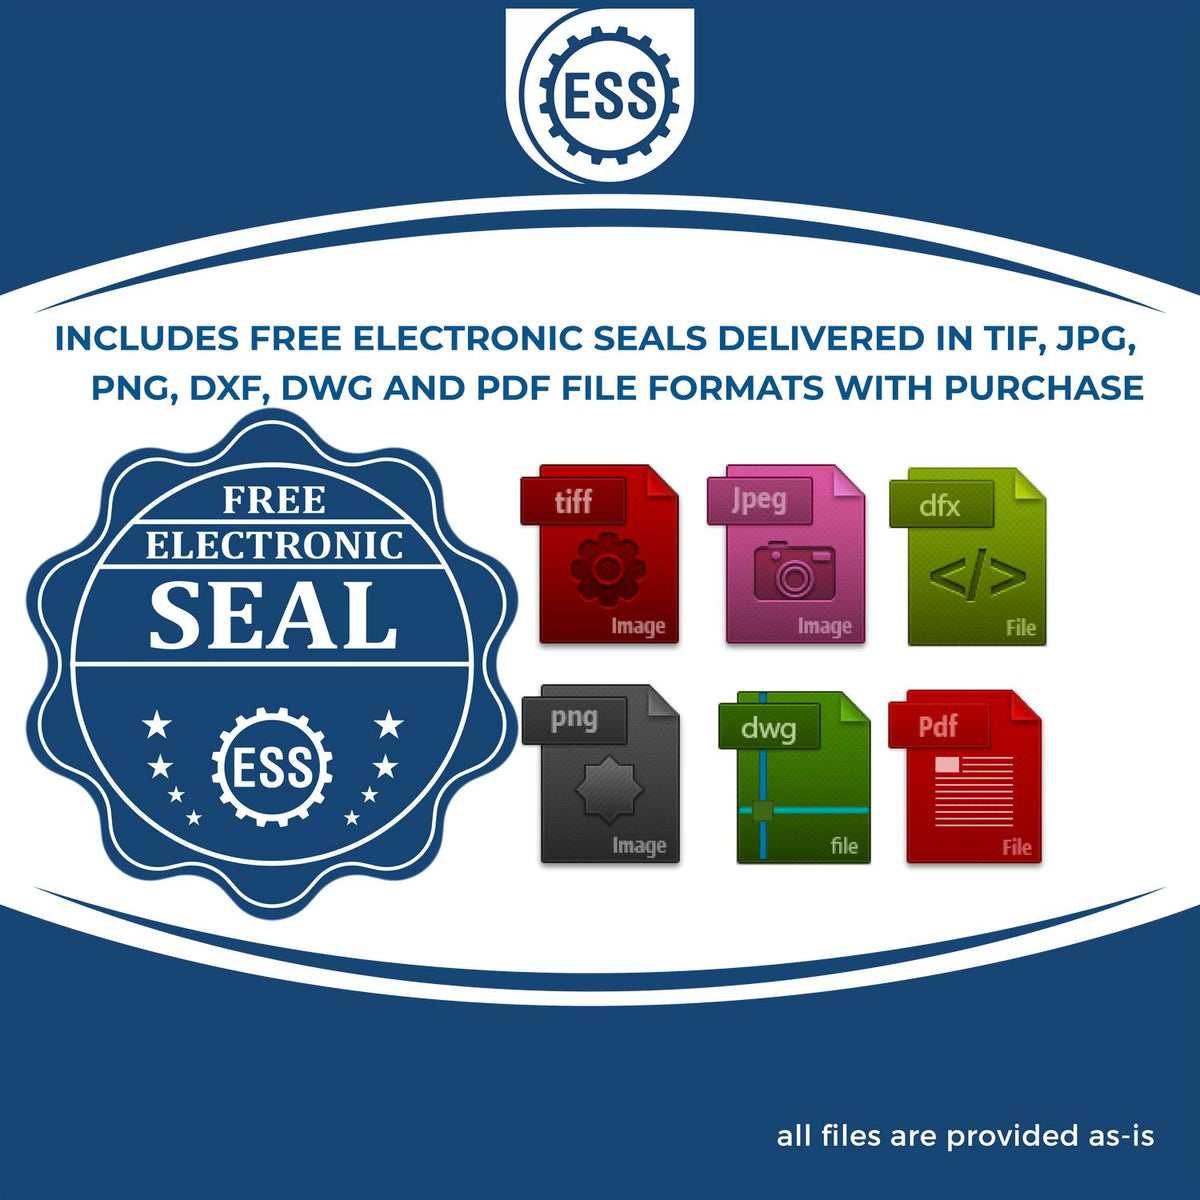 An infographic for the free electronic seal for the Premium MaxLight Pre-Inked West Virginia Engineering Stamp illustrating the different file type icons such as DXF, DWG, TIF, JPG and PNG.